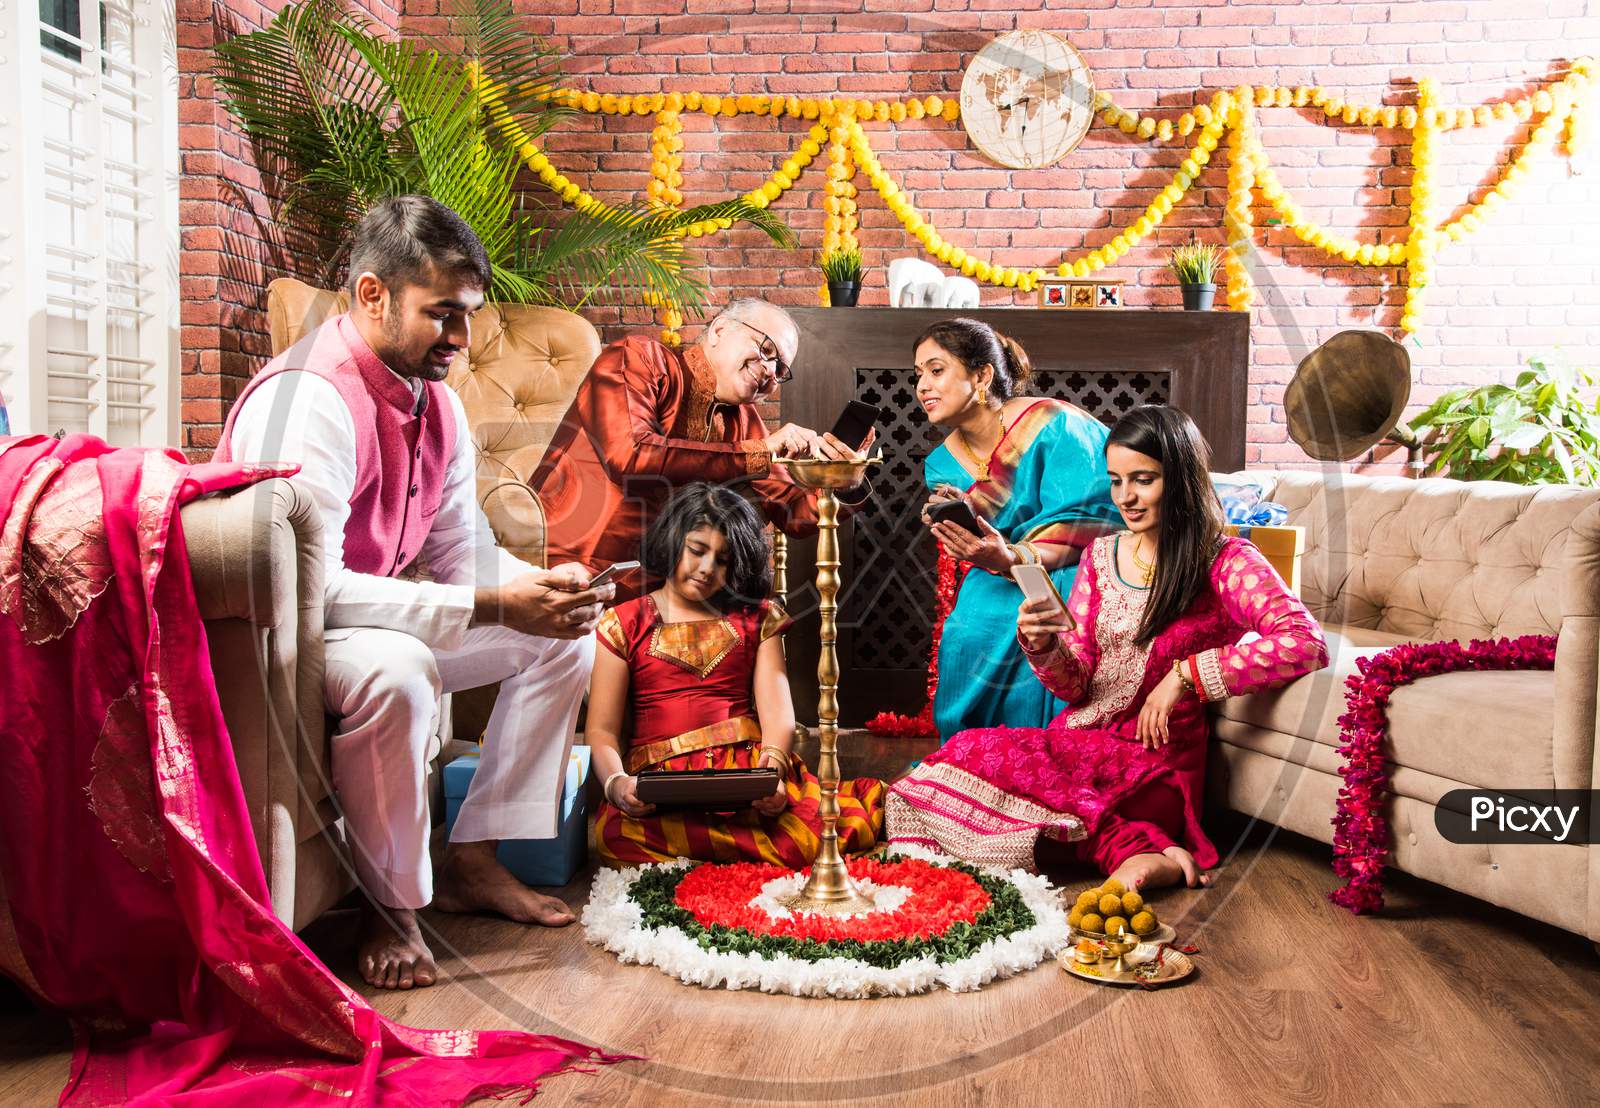 Multigenerational Indian Family Addicted To Mobile Phone Or Using Smartphone In Diwali Festival